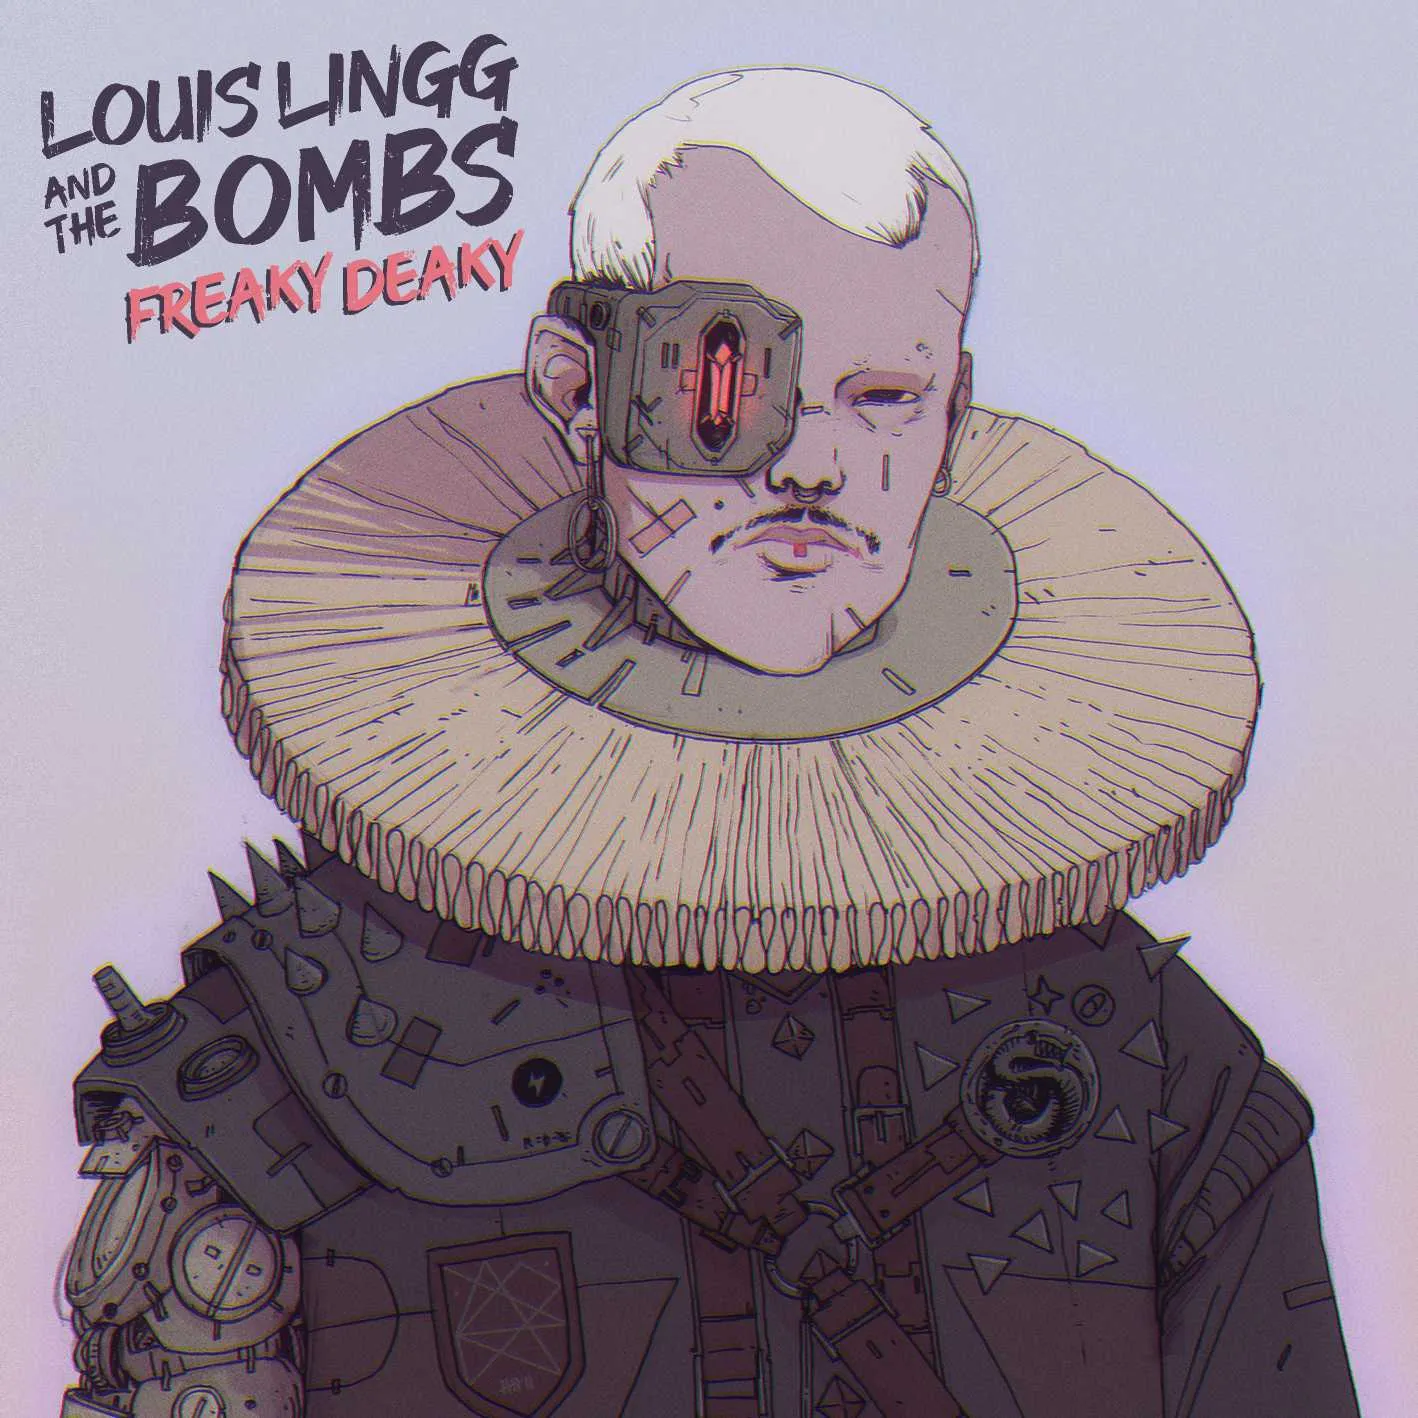 Album cover for “Freaky Deaky” by Louis Lingg and The Bombs